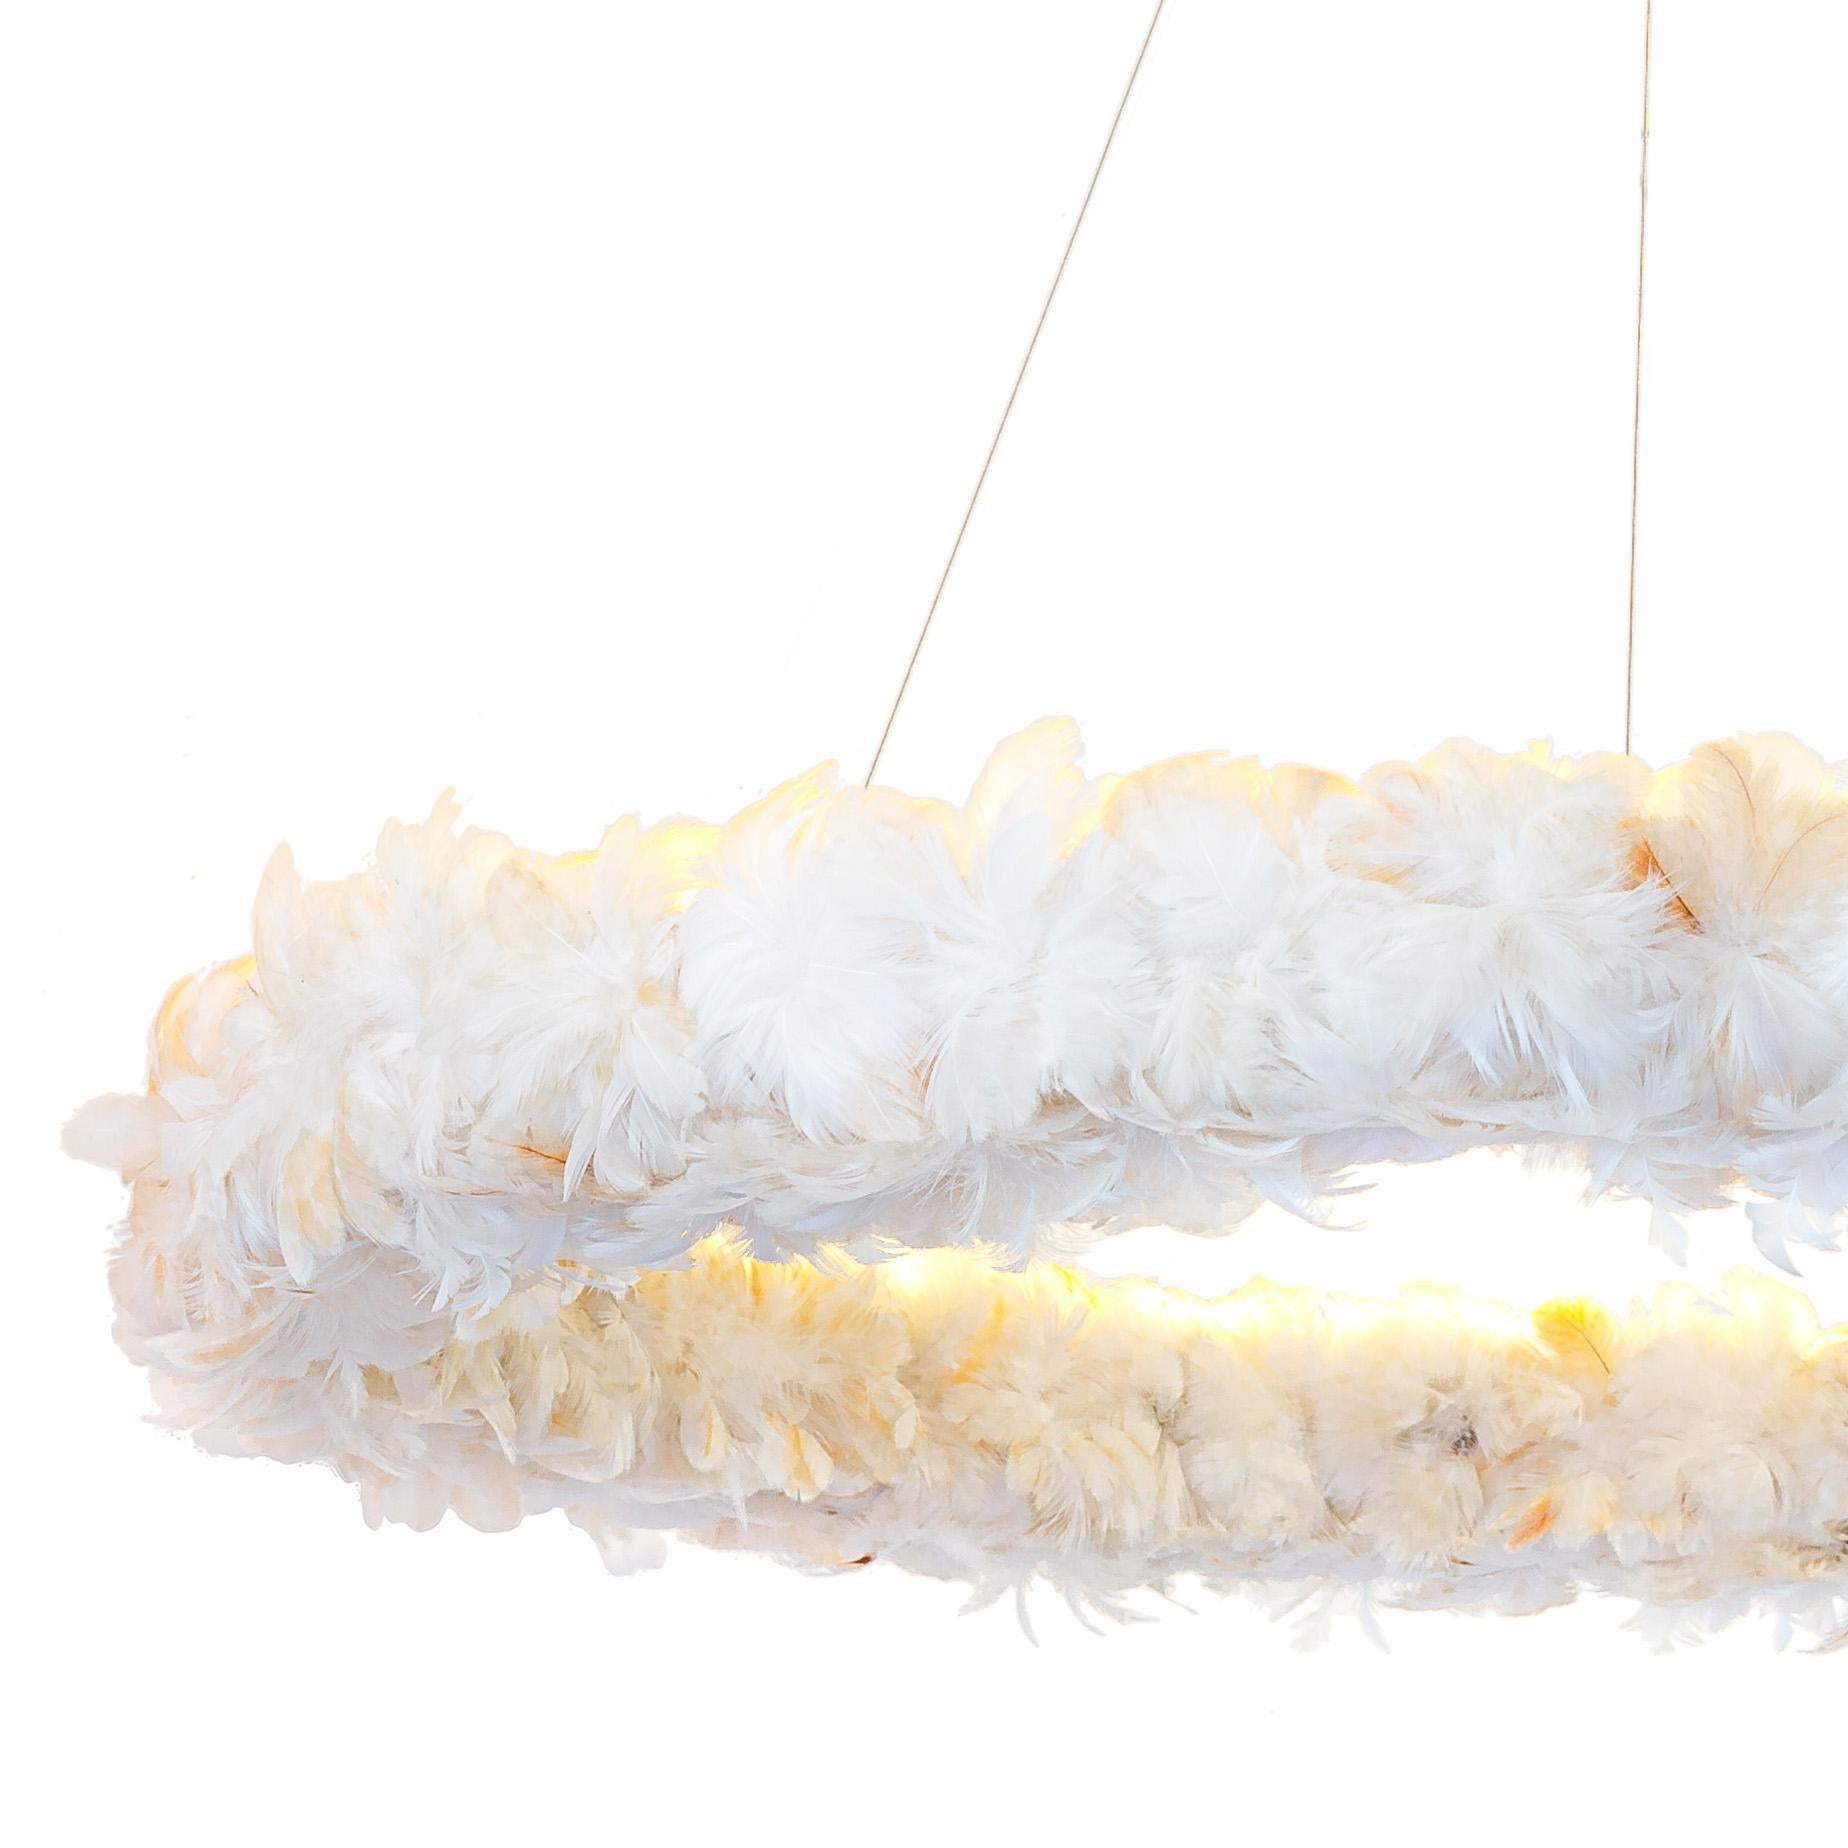 Indirect light luminaire made in recycled peroba wood with intertwined feather flowers, providing soft lighting. Suspended by steel cables, the luminaire floats delicately in the air. 

Inspired by the feather headbands traditionally used by the